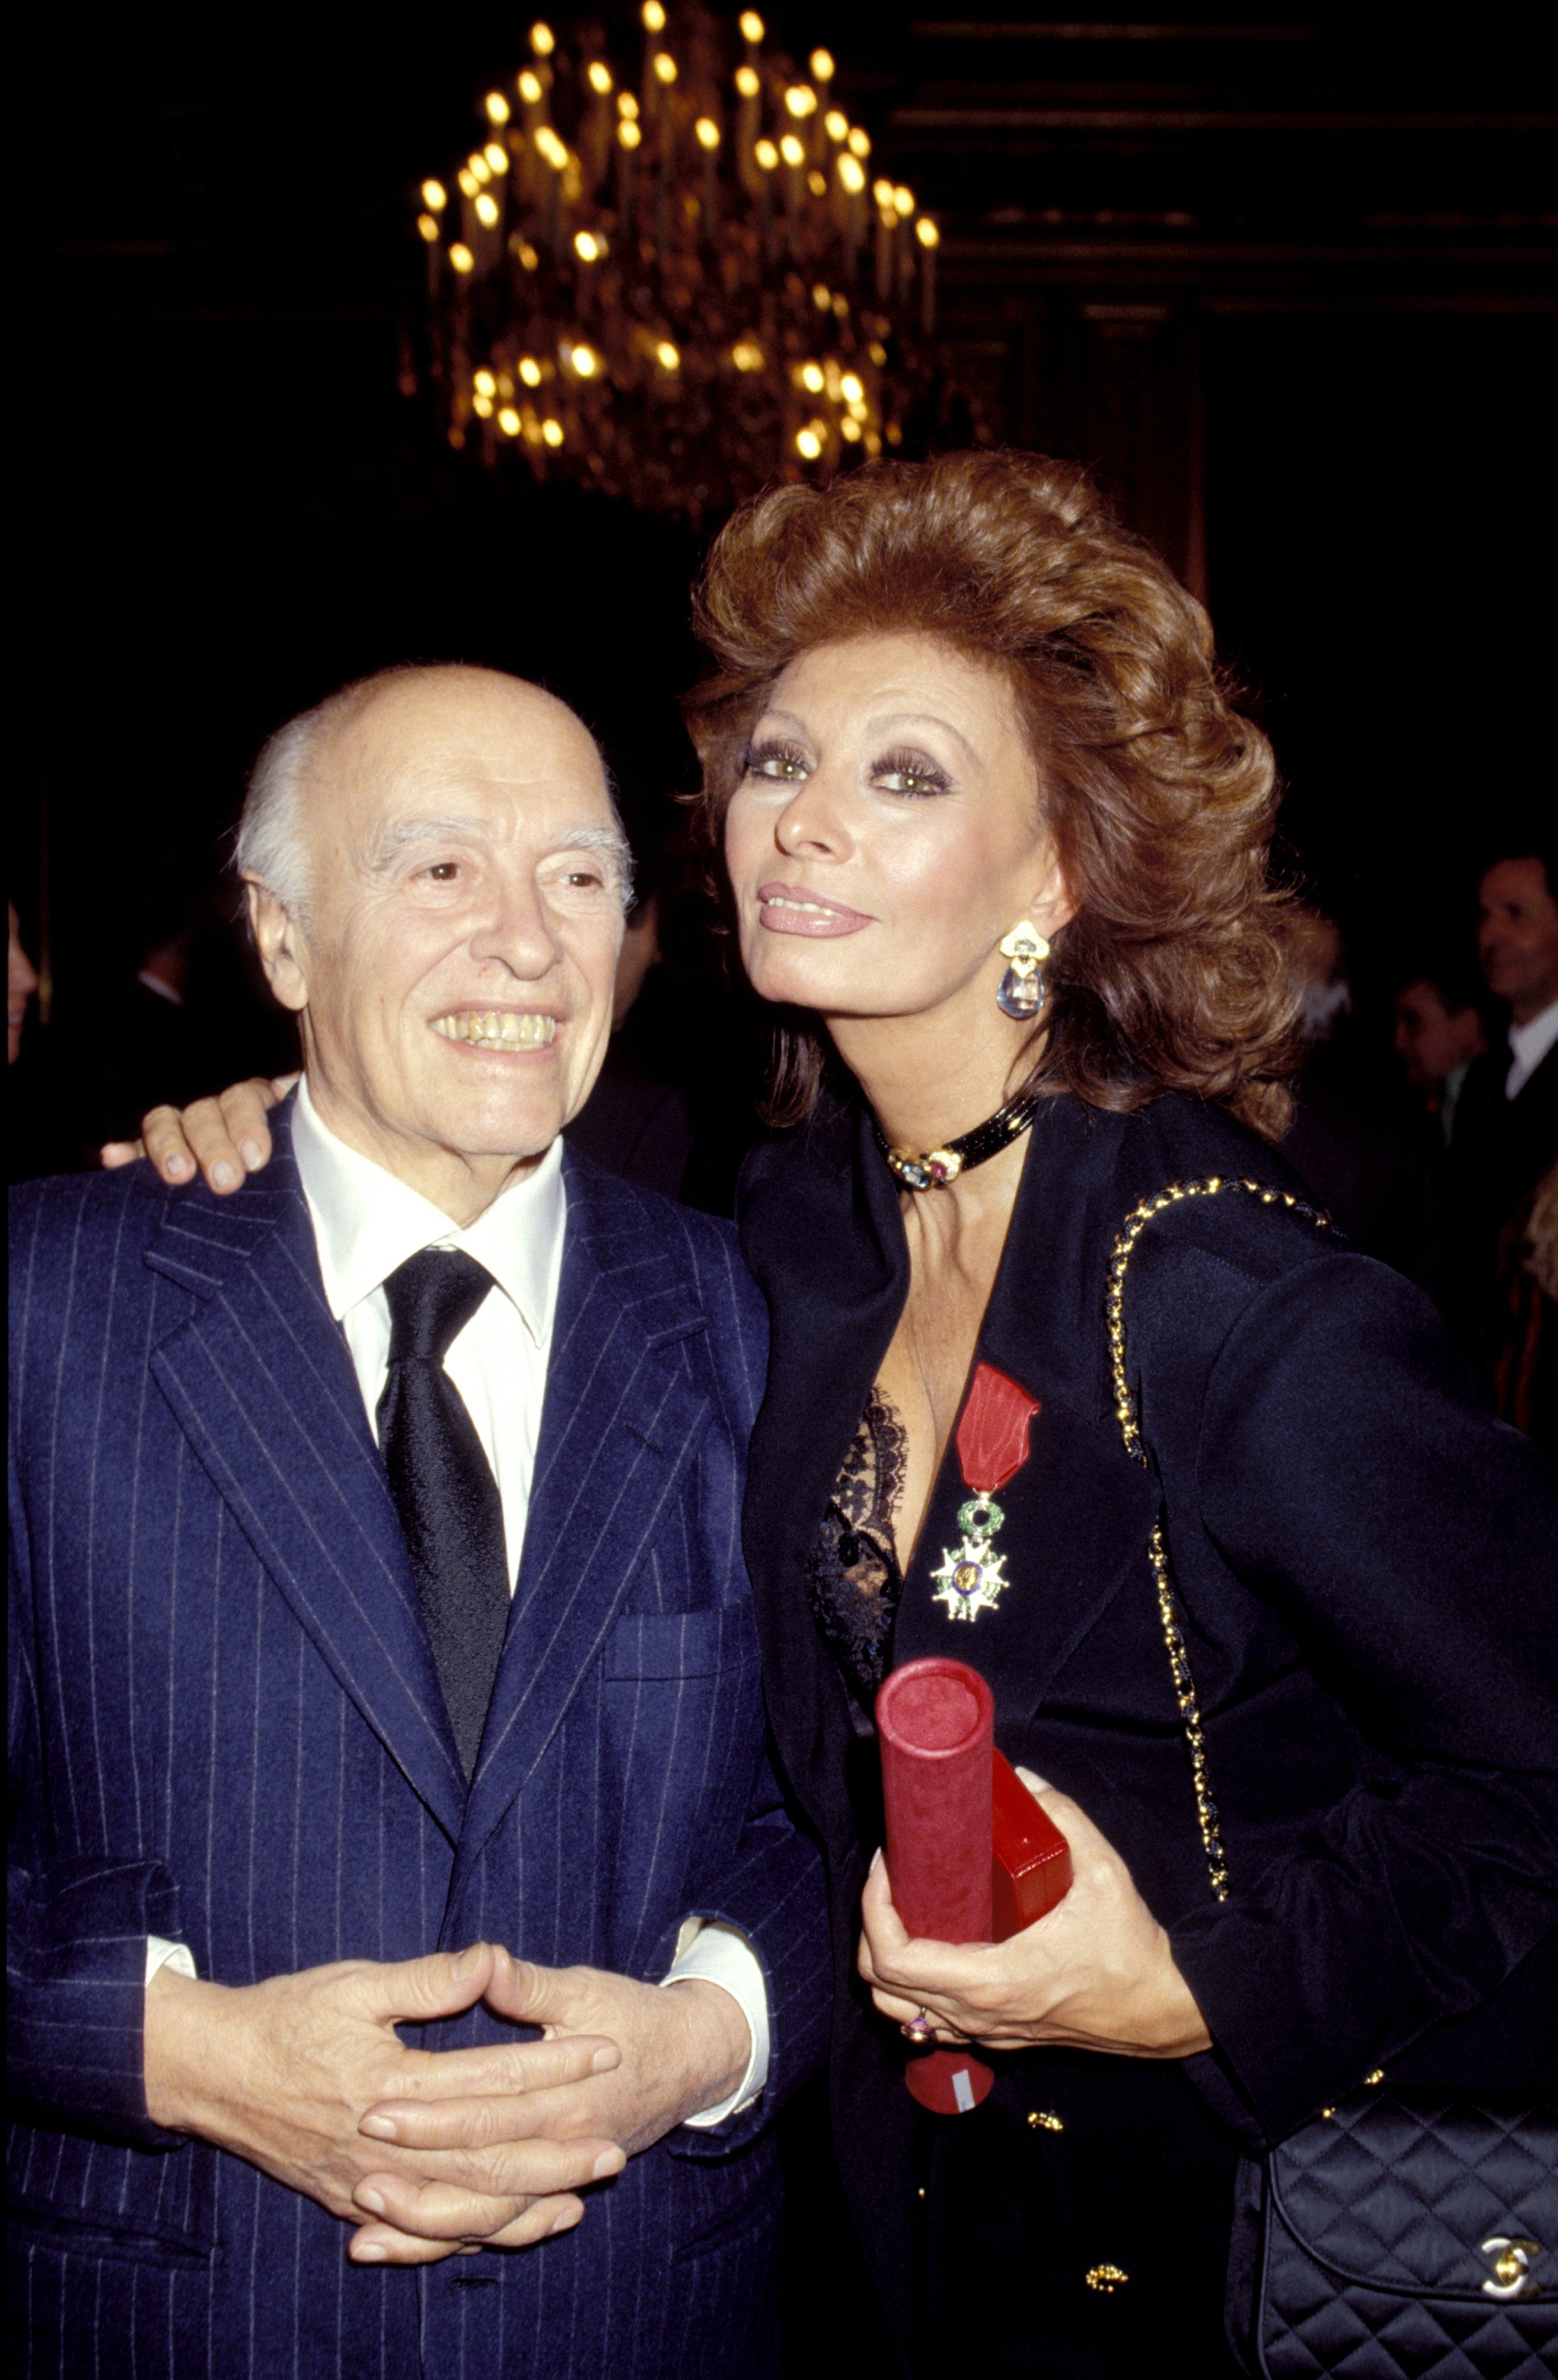 Sophia Loren and Carlo Ponti attend an event at the Elyses Presidential Palace in Paris, France, December 19, 1991. Source: Getty Images